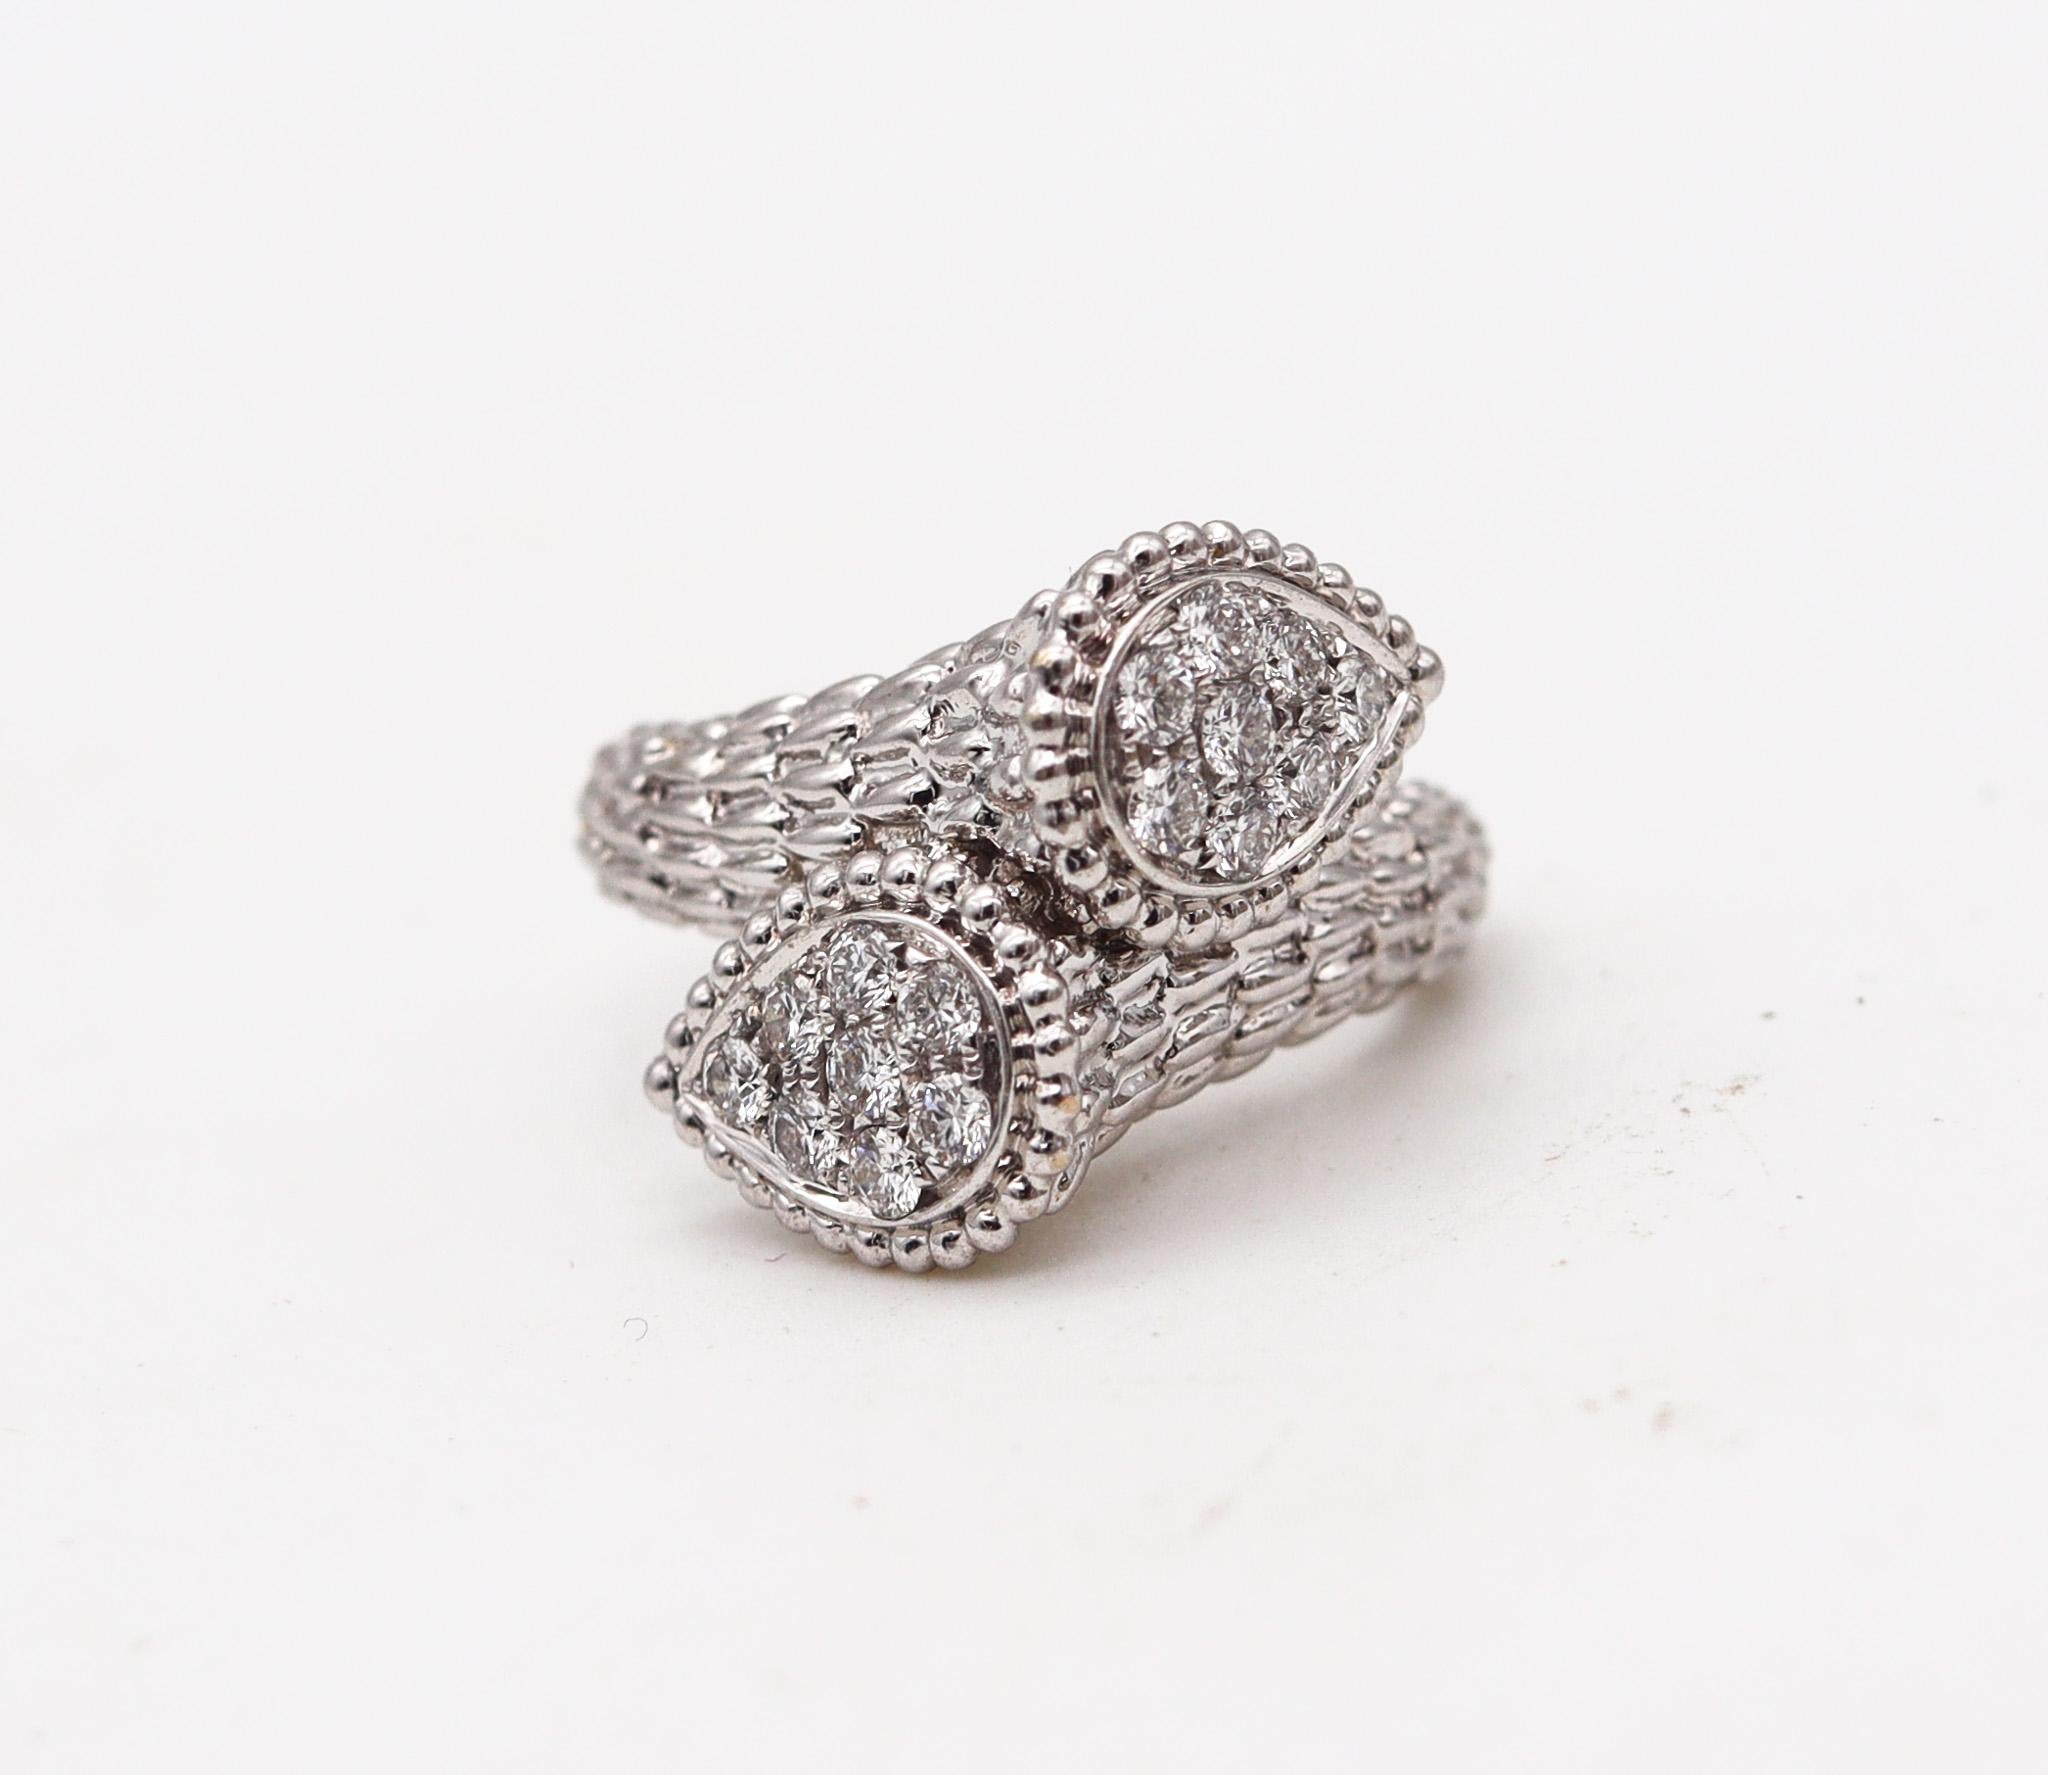 Serpent Boheme Toe Et Moi ring designed by Boucheron.

This is one of the most contemporary iconic designs, created by the French jewelry house of Boucheron. This classic Serpent Boheme Toi et Moi ring has been carefully crafted in solid textured